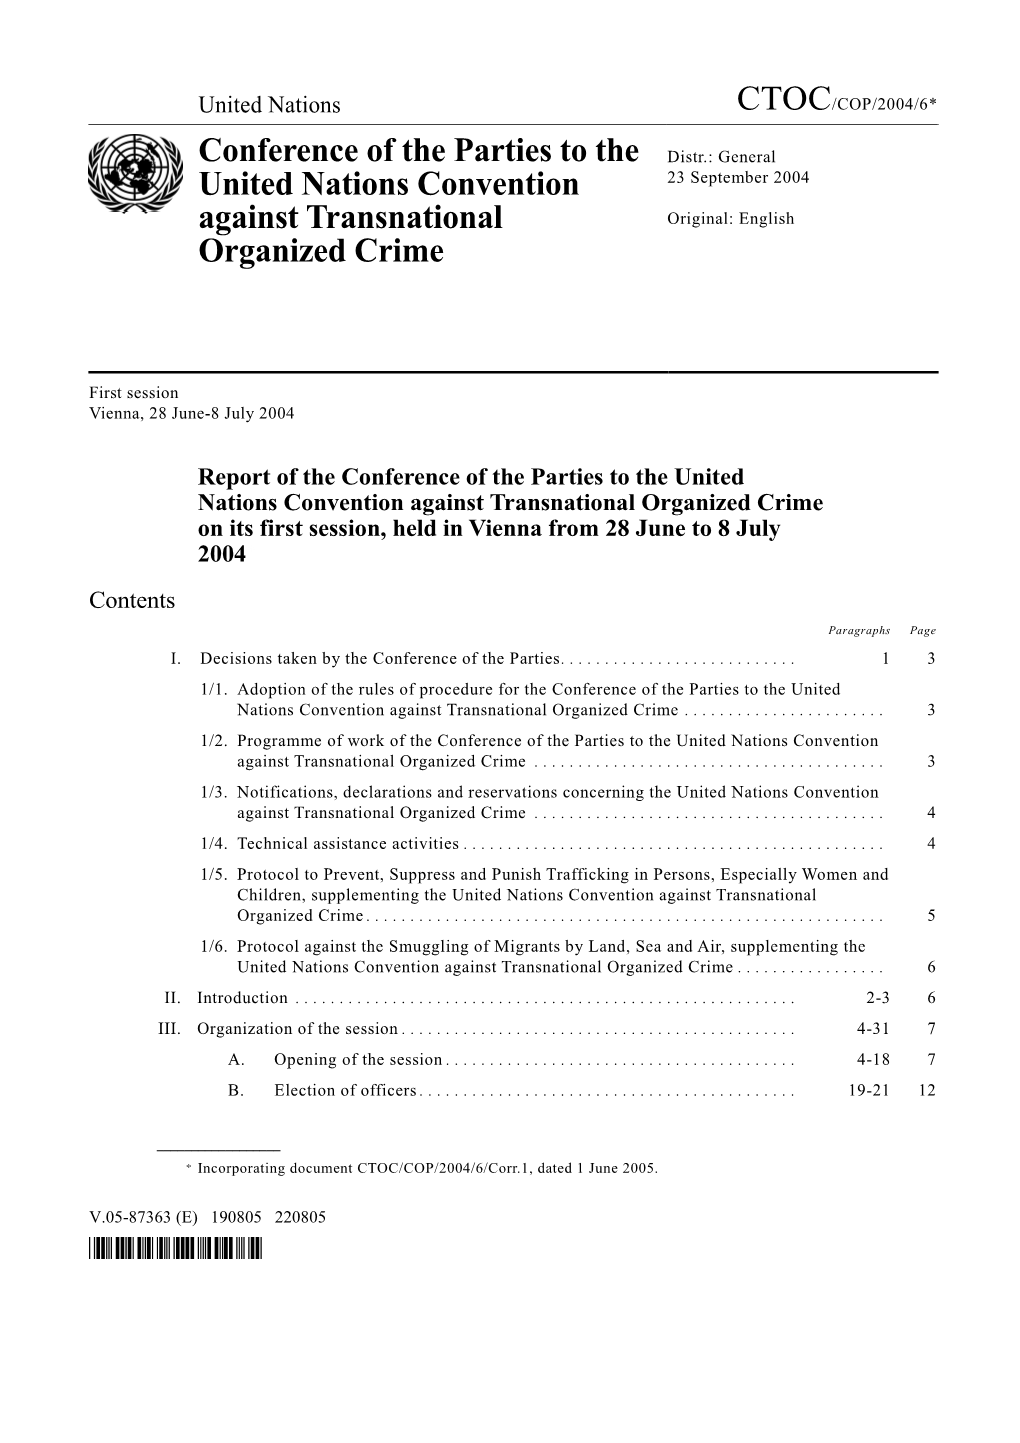 Conference of the Parties to the United Nations Convention Against Transnational Organized Crime on Its First Session, Held in Vienna from 28 June to 8 July 2004∗